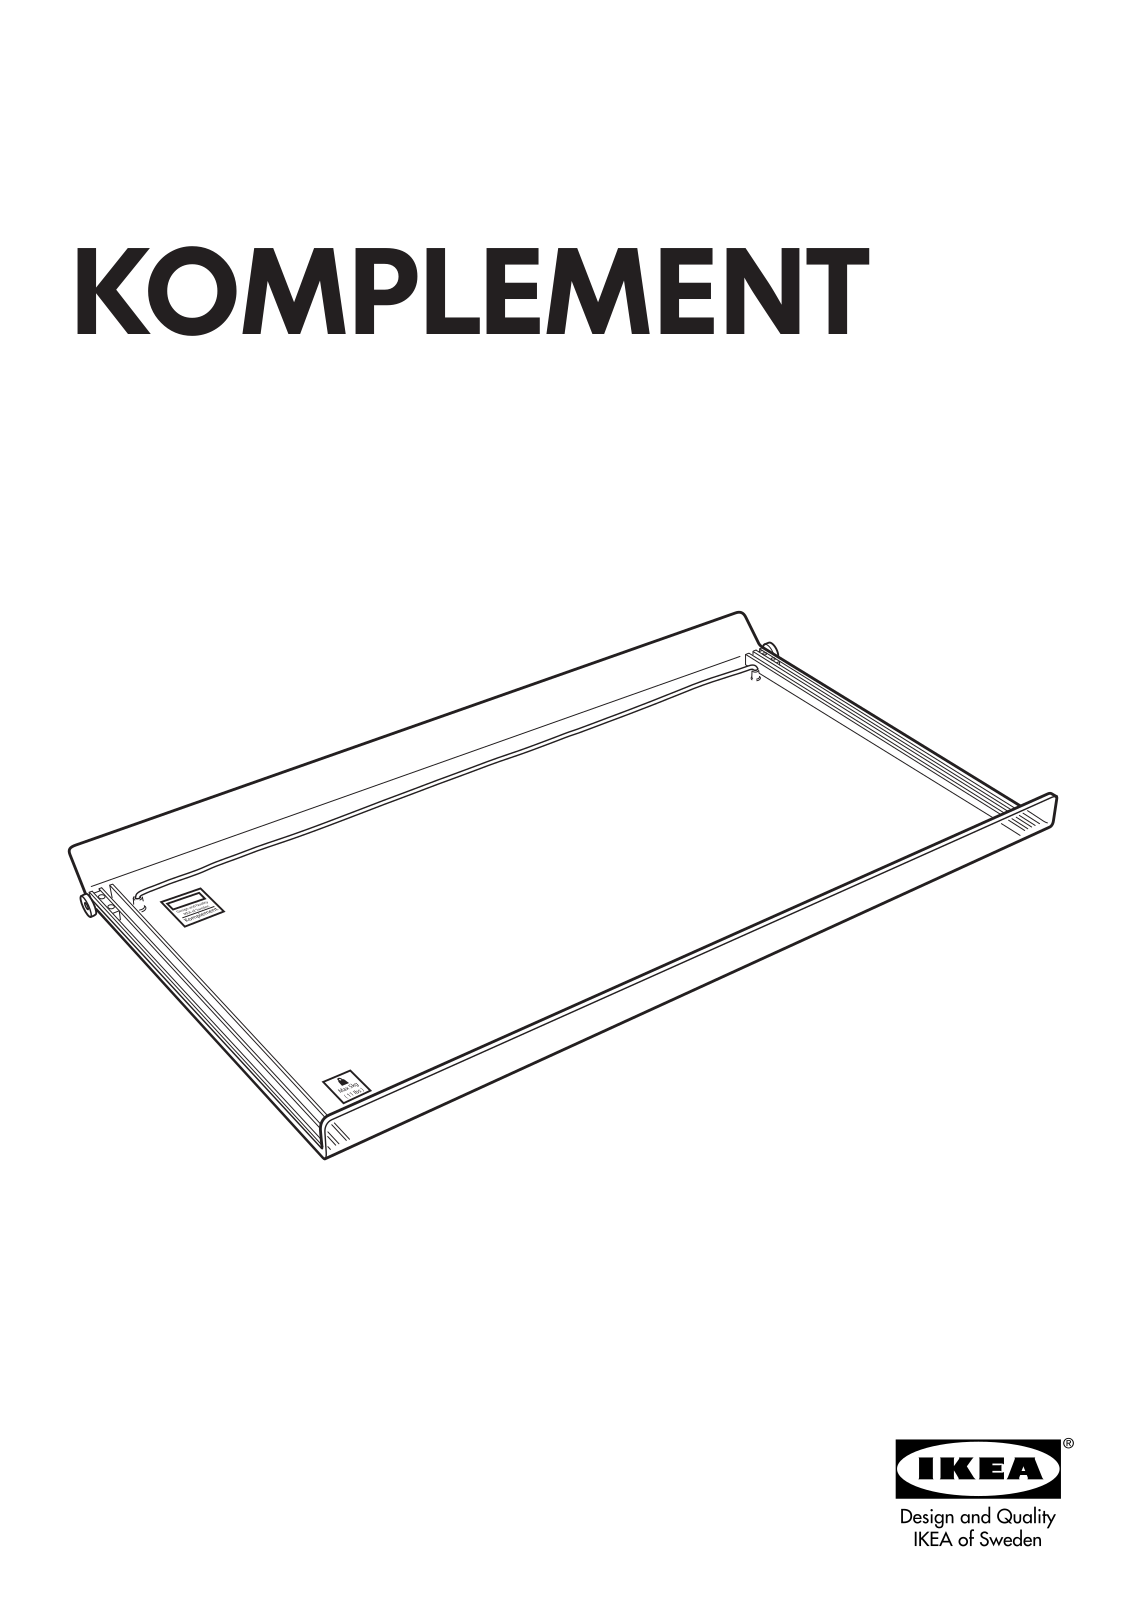 IKEA KOMPLEMENT PULL-OUT SHELF 39X23 Assembly Instruction